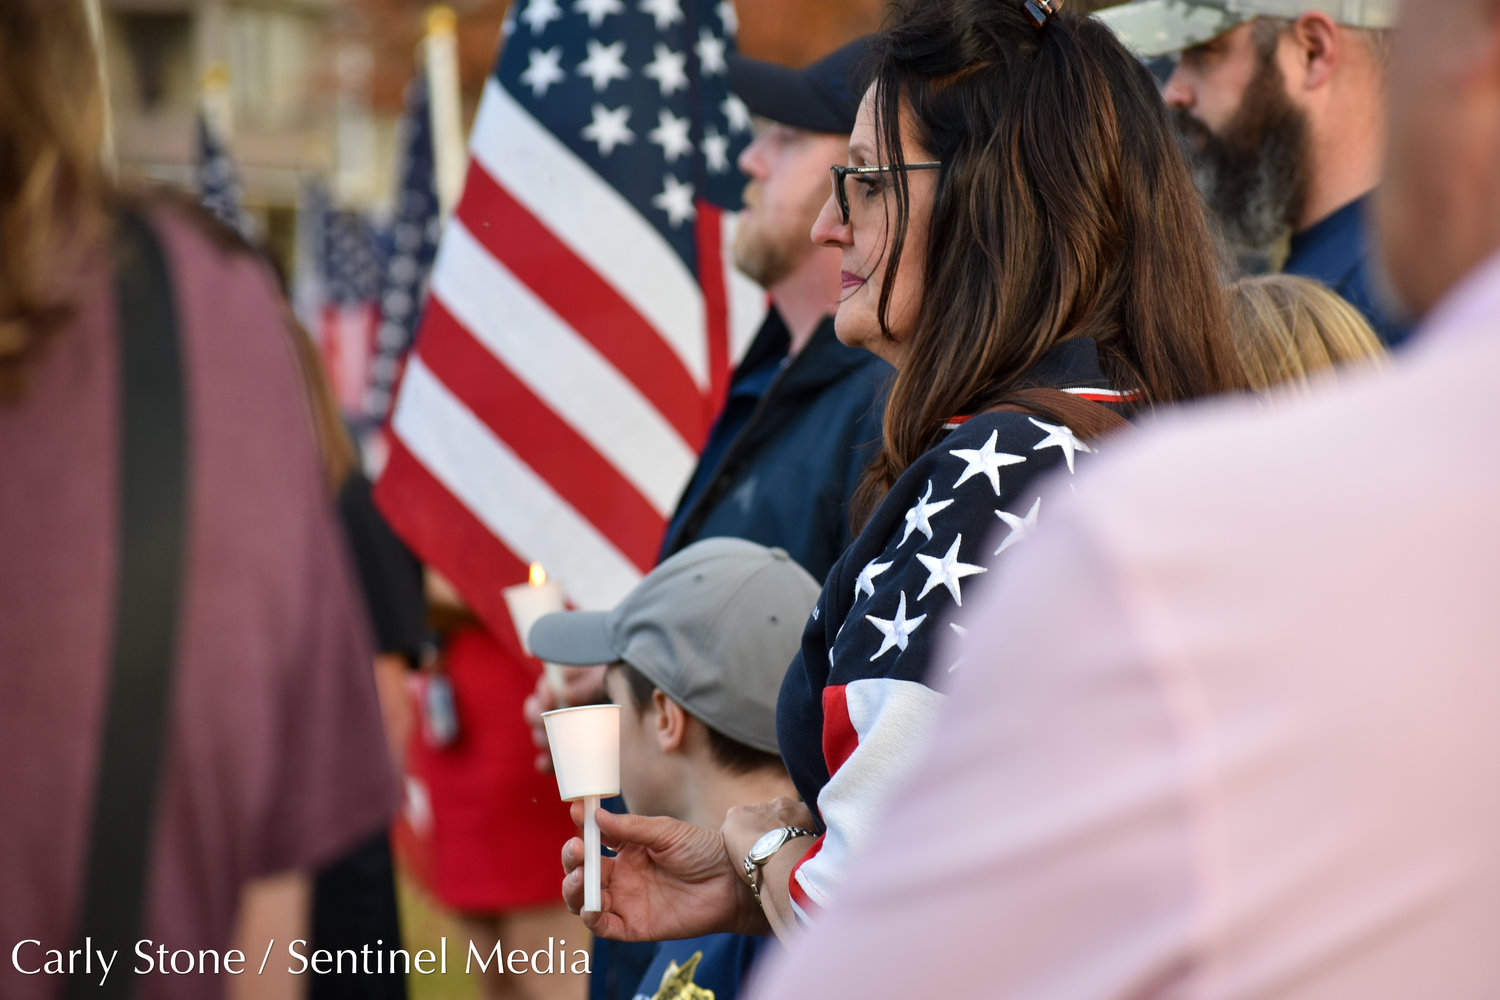 People gathered among the Healing Field of flags at Utica's Memorial Parkway on Saturday, November 5 to participate in a candlelight ceremony in honor of the nation's veterans.